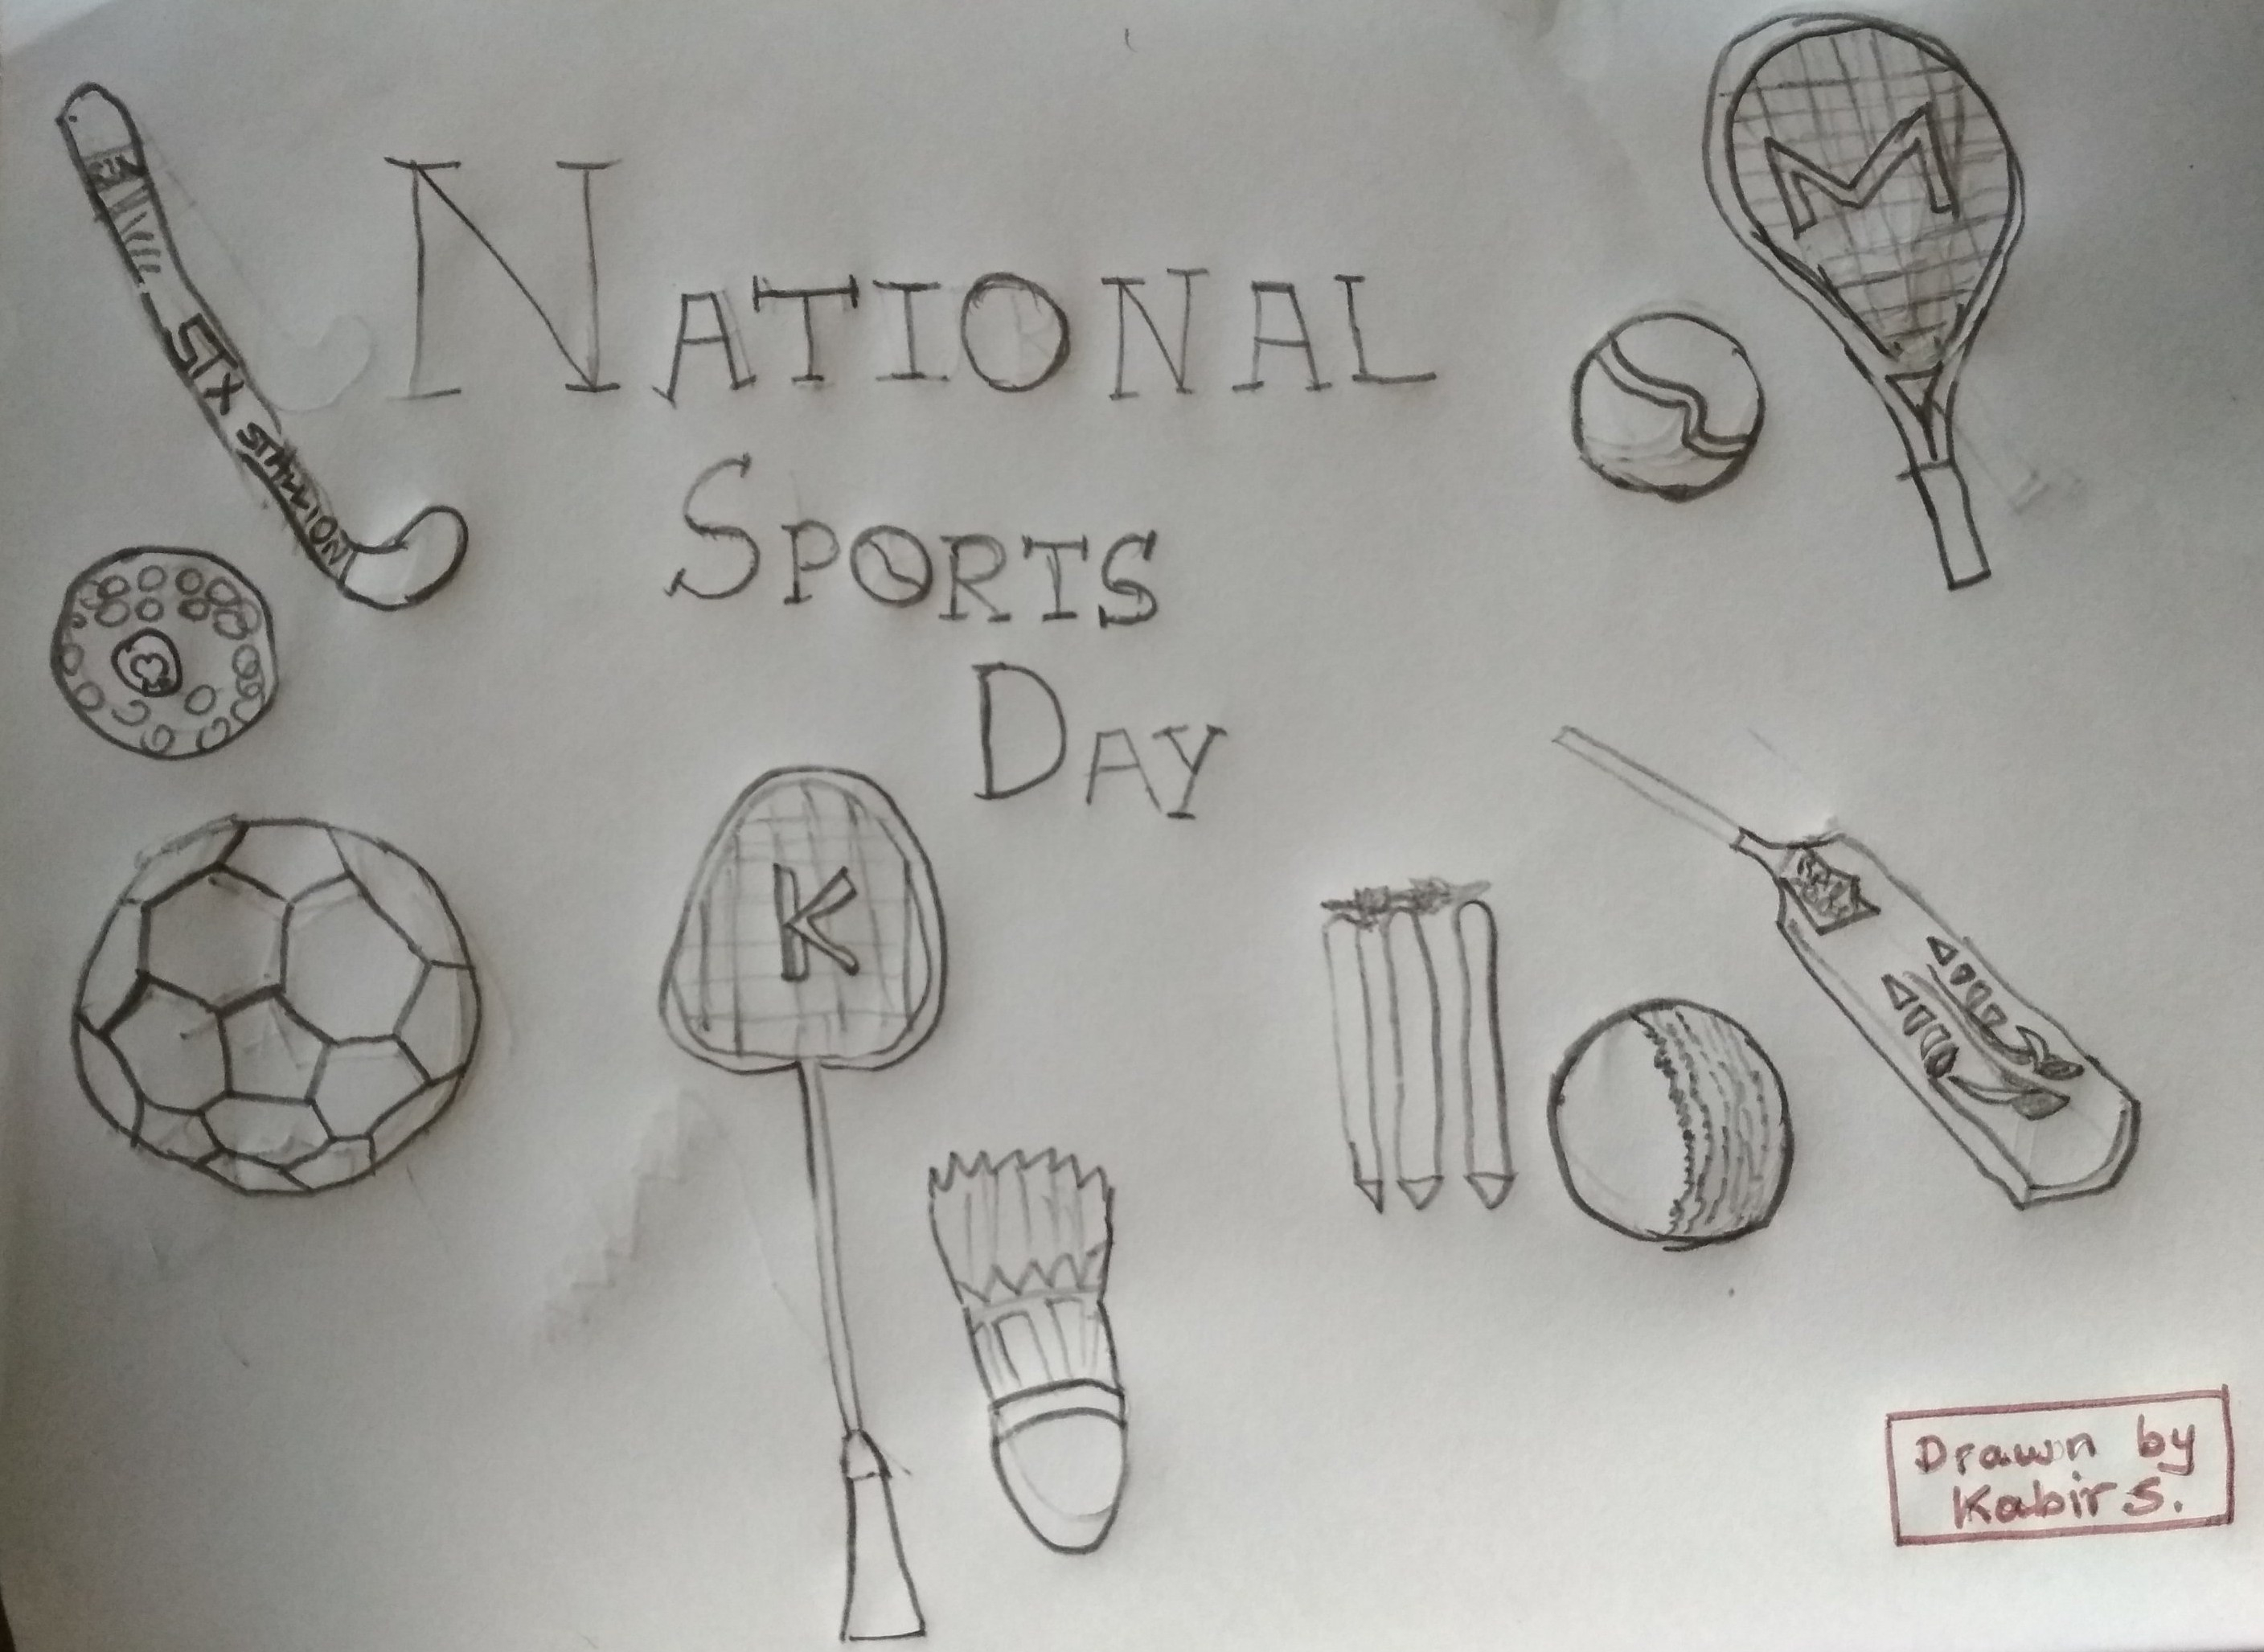 National Sports Day Drawing / National Sports Day Poster Drawing / Sports  Day Drawing | Sports day poster, National sports day, Poster drawing